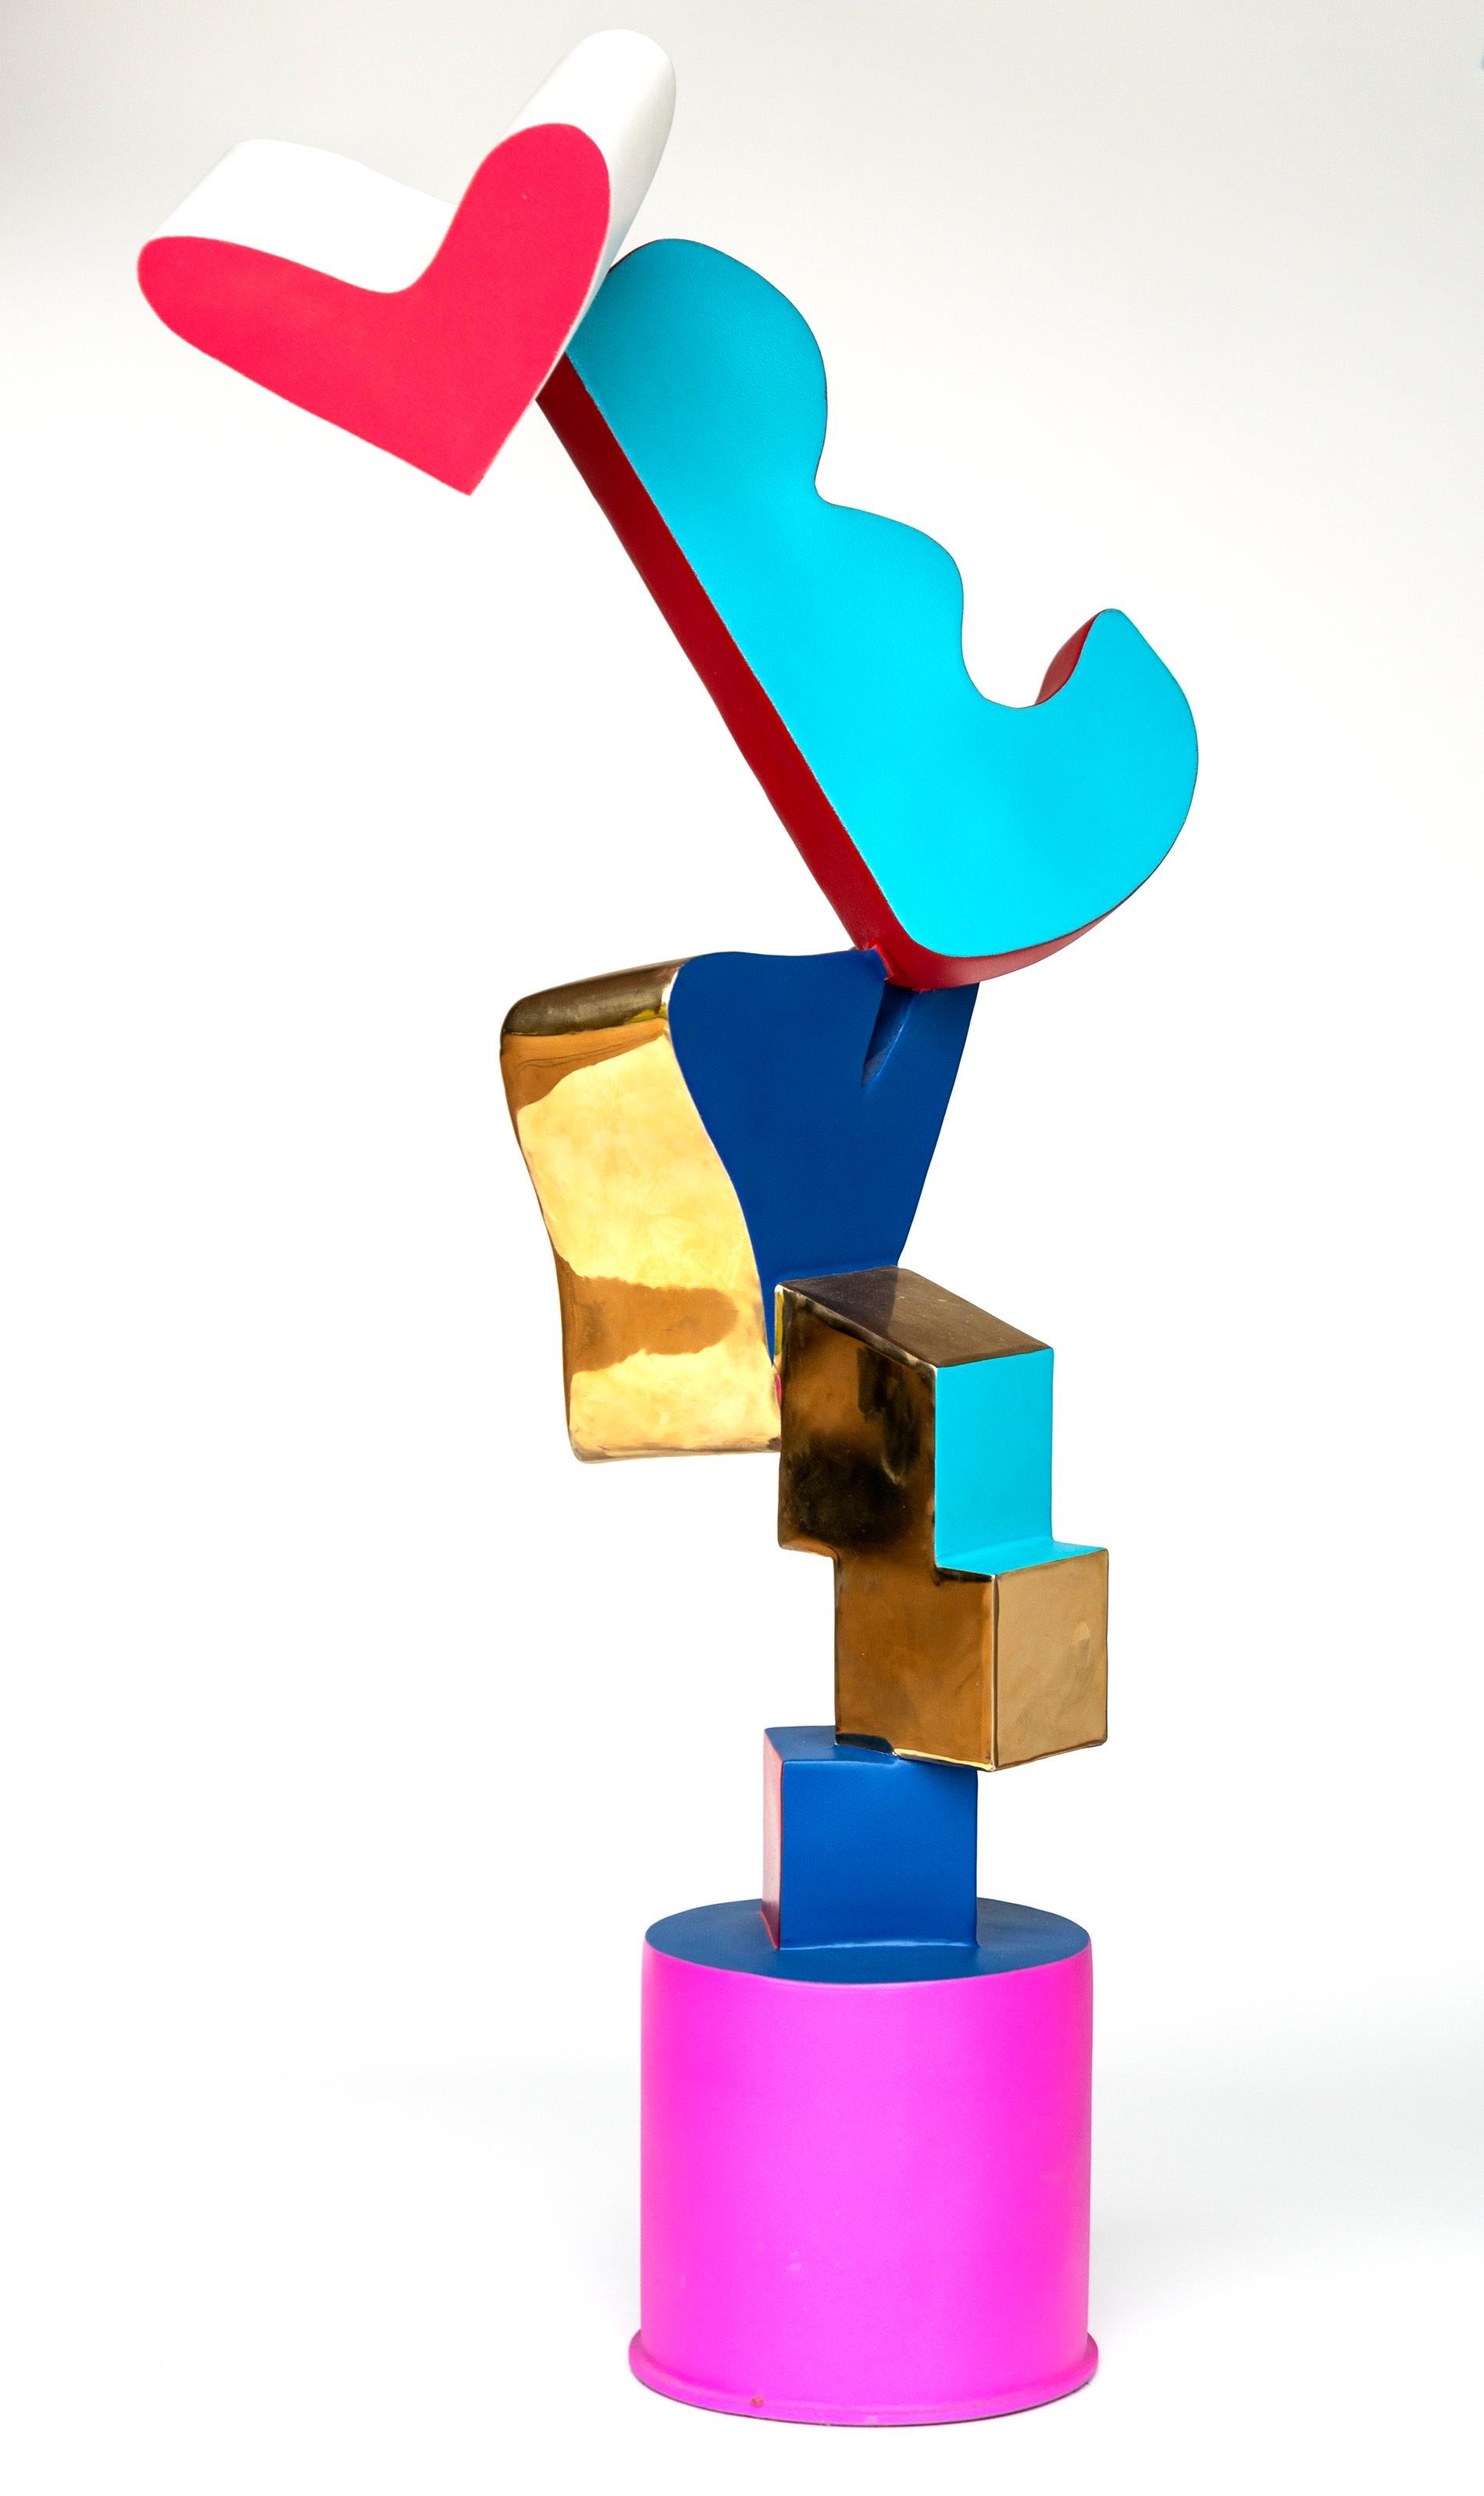 Swift - bright, colourful, abstract, pop art, painted stainless steel sculpture